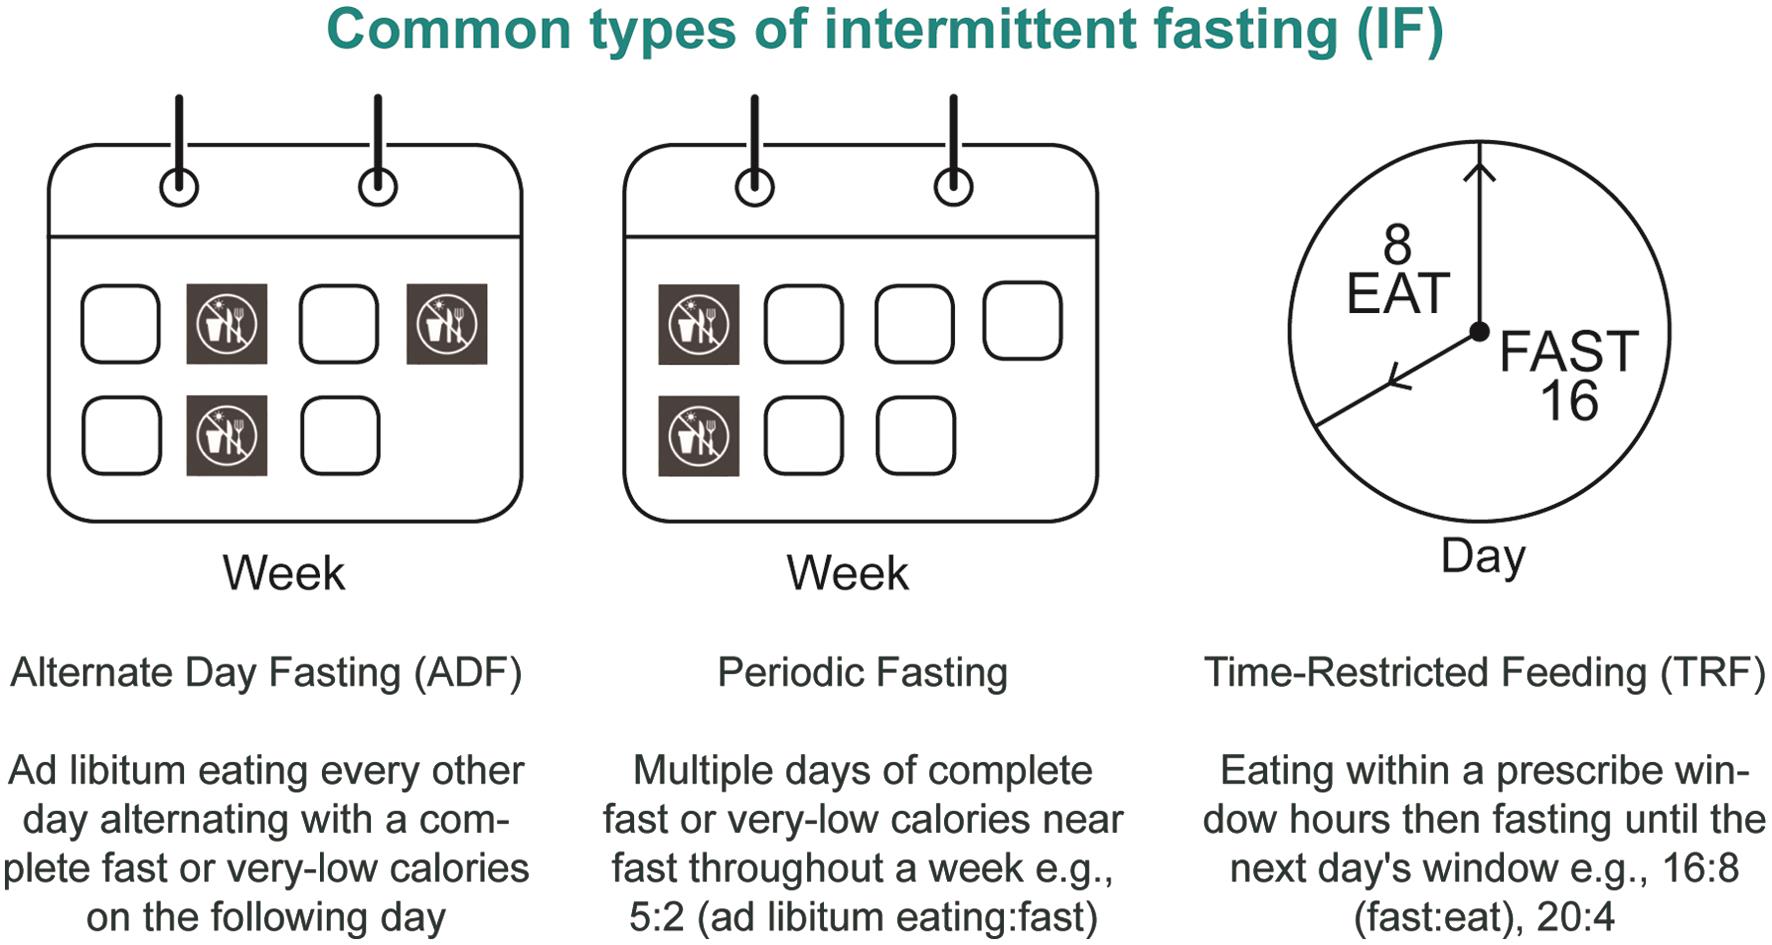 Common types of intermittent fasting (IF).